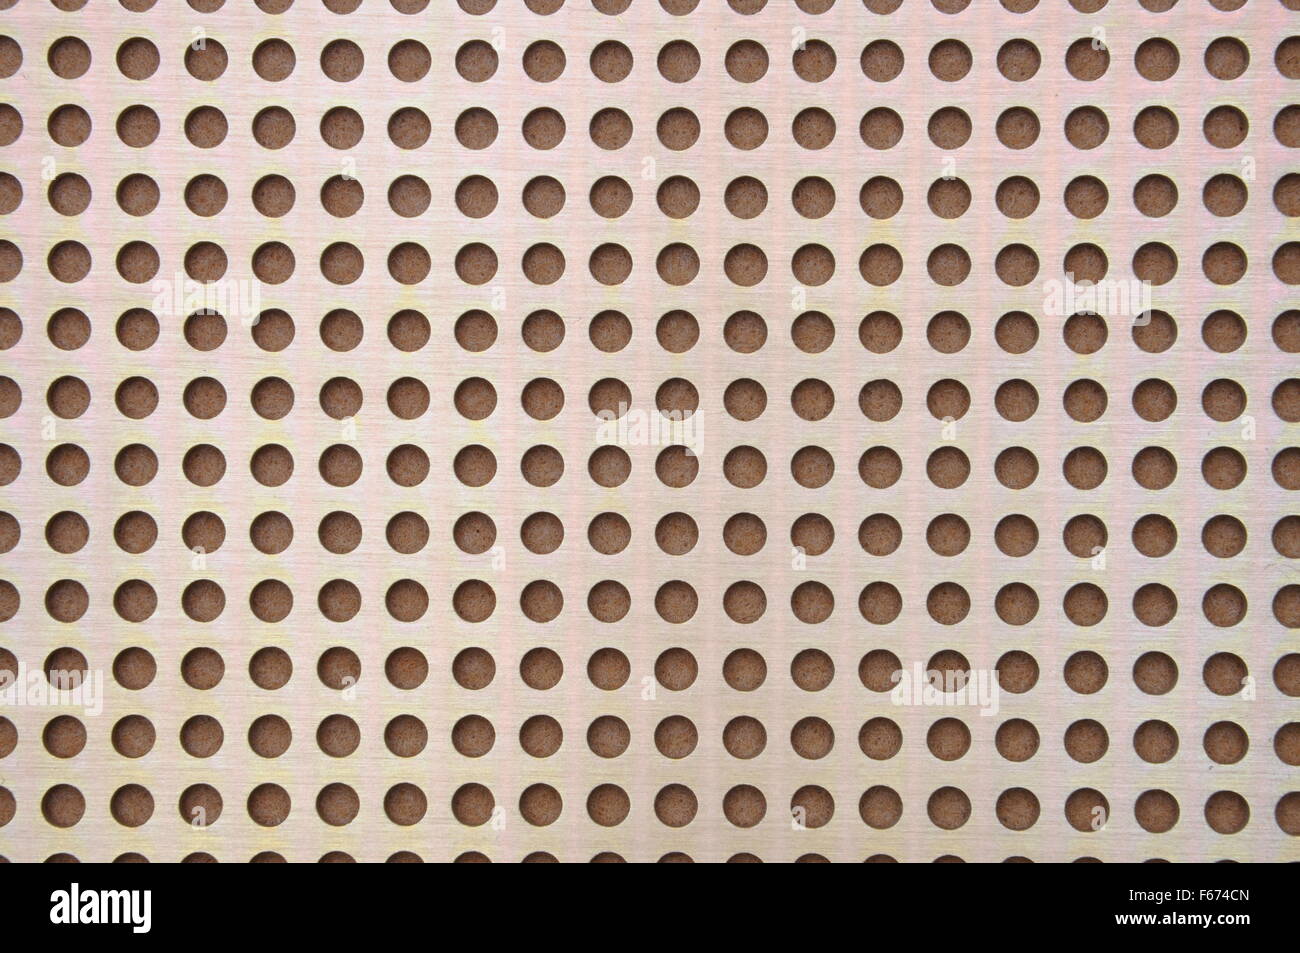 Metal sheet surface with holes Stock Photo